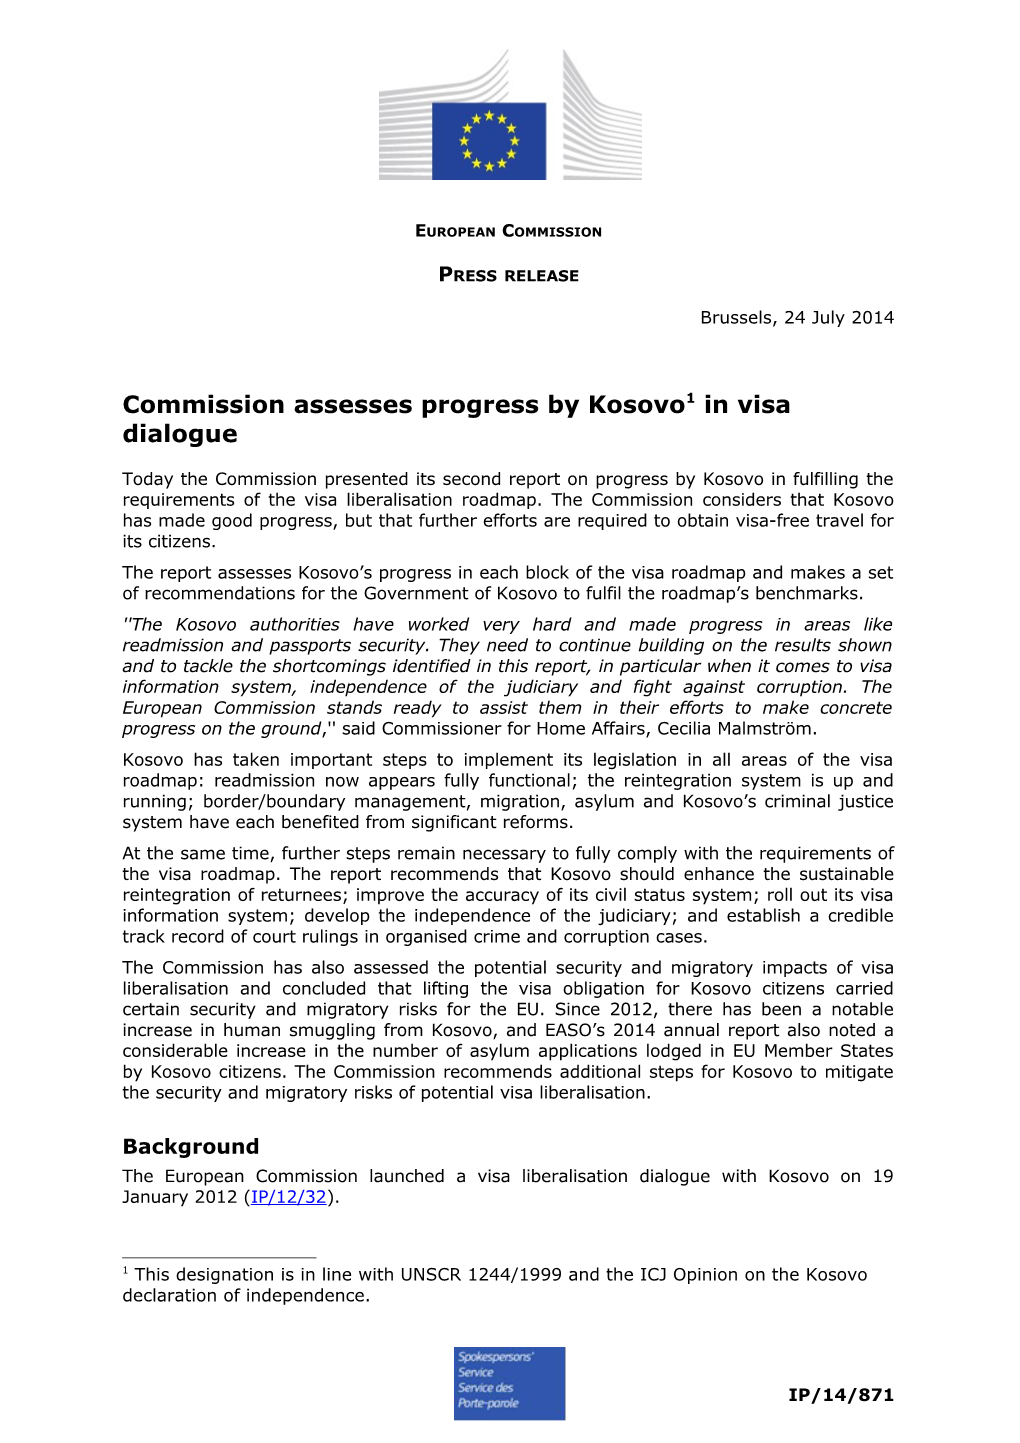 Commission Assesses Progress by Kosovo * in Visa Dialogue